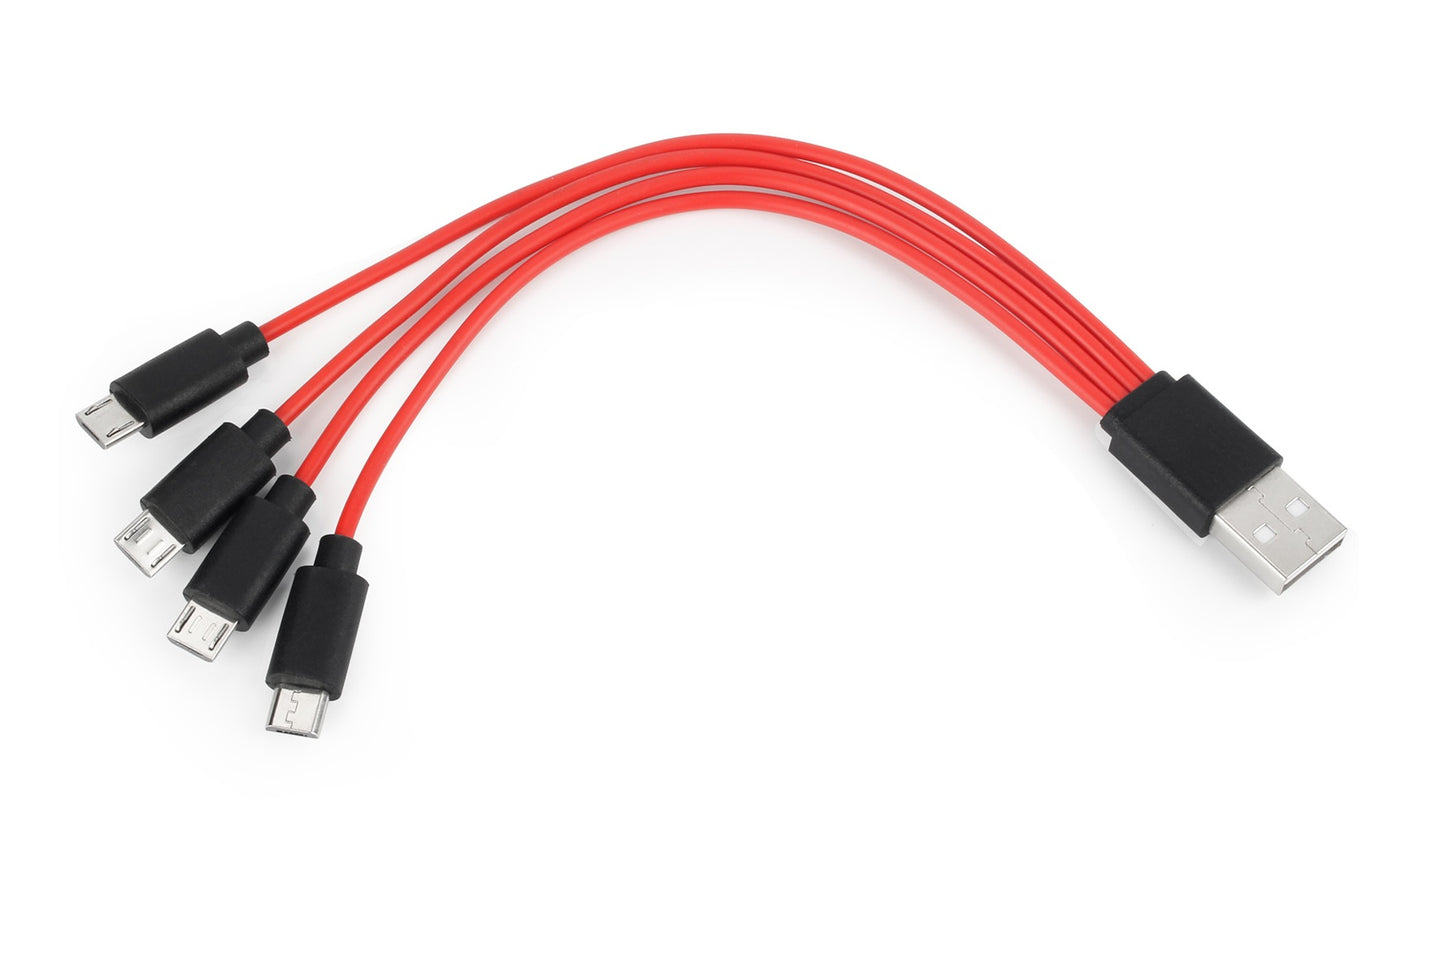 New 4 in 1 MicroUSB USB Charging Cable